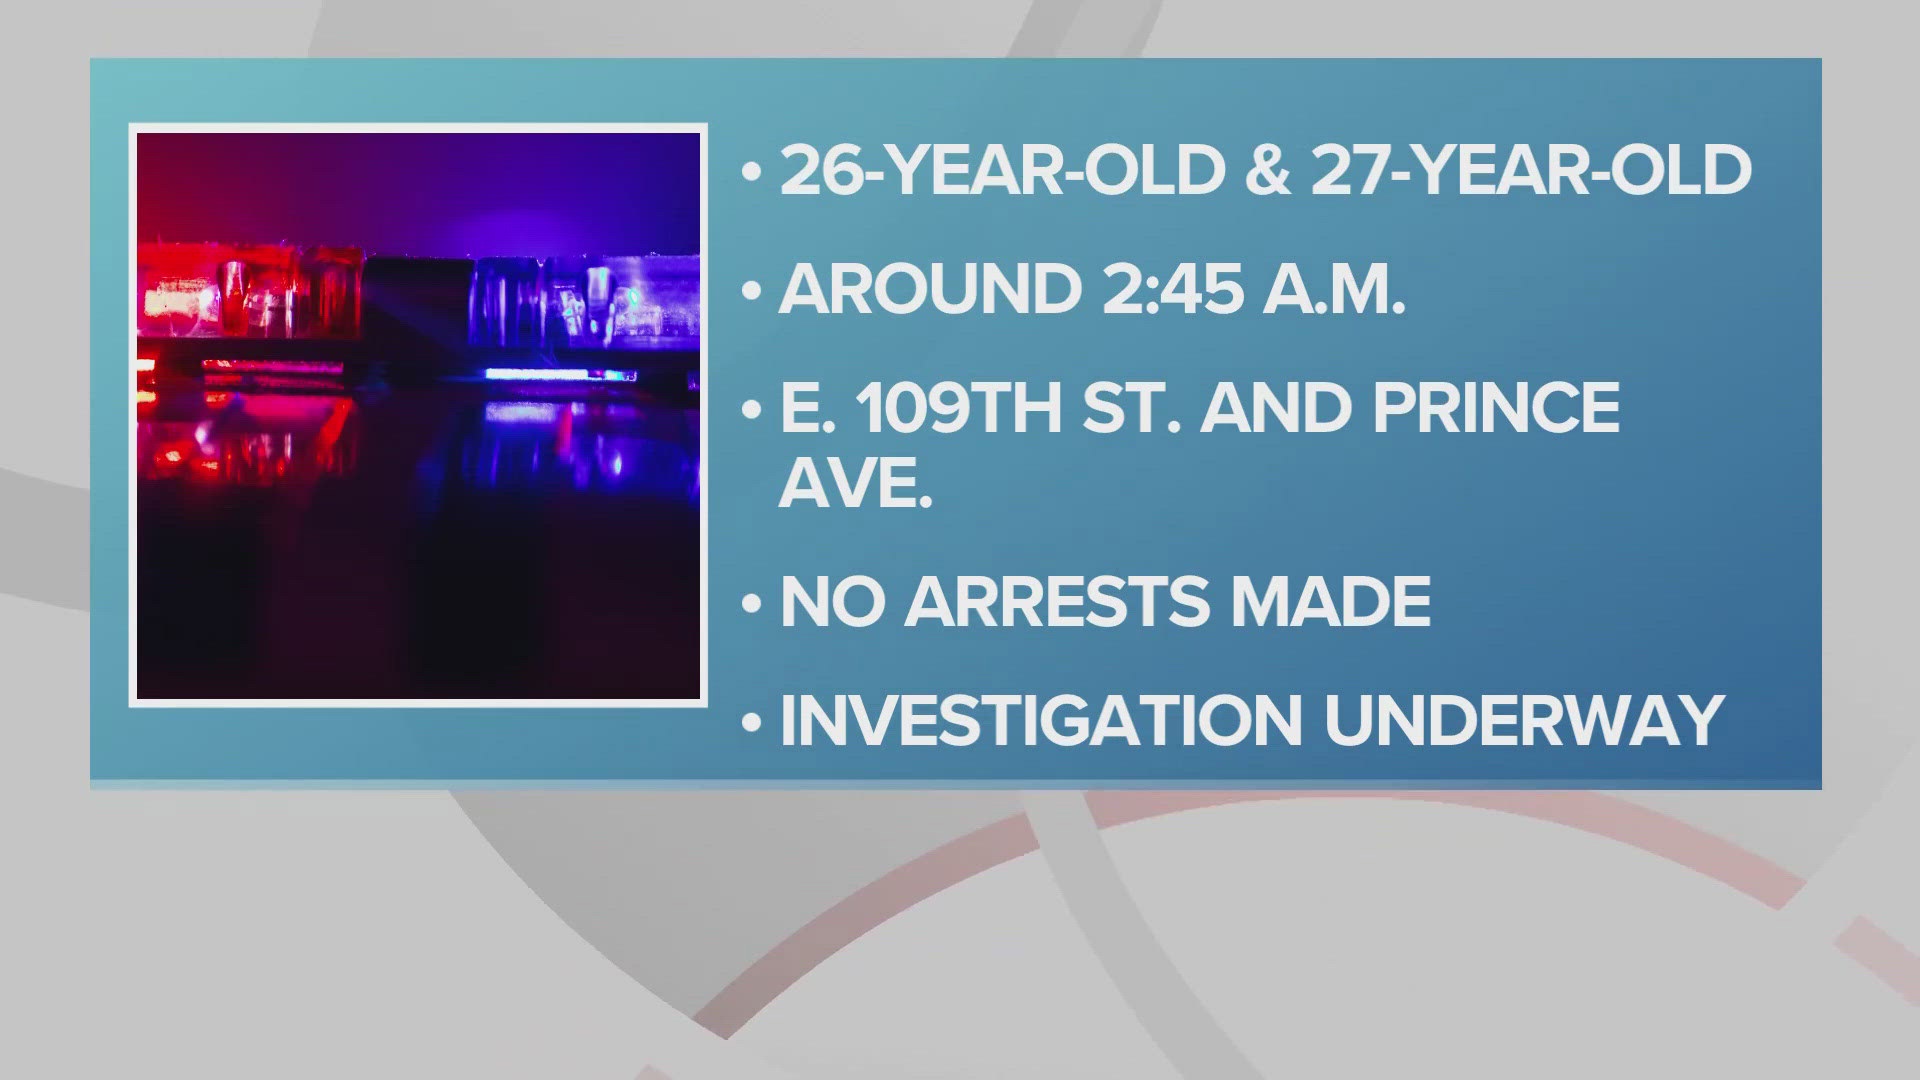 Cleveland police say it was around 2:45 a.m. when officers responded to the scene and found two men -- ages 26 and 27 -- with gunshot wounds.